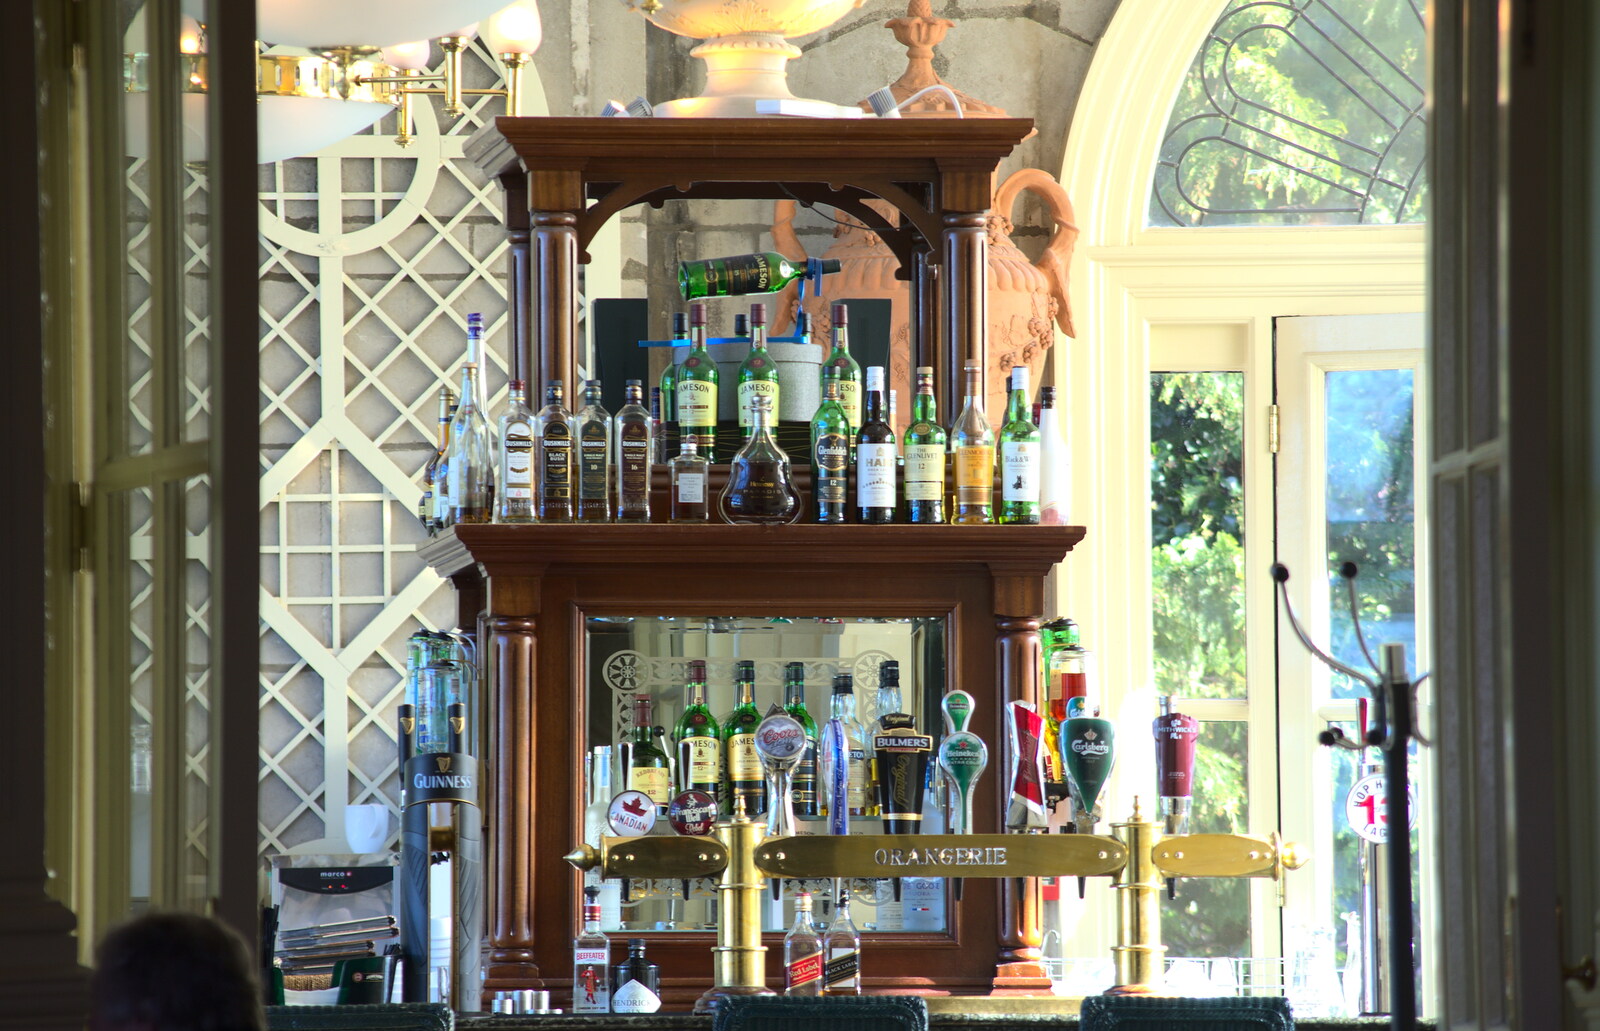 The bar has a fancy bar in the Orangerie from James and Haryanna's Wedding, Grand Canal Dock, Dublin - 15th April 2015